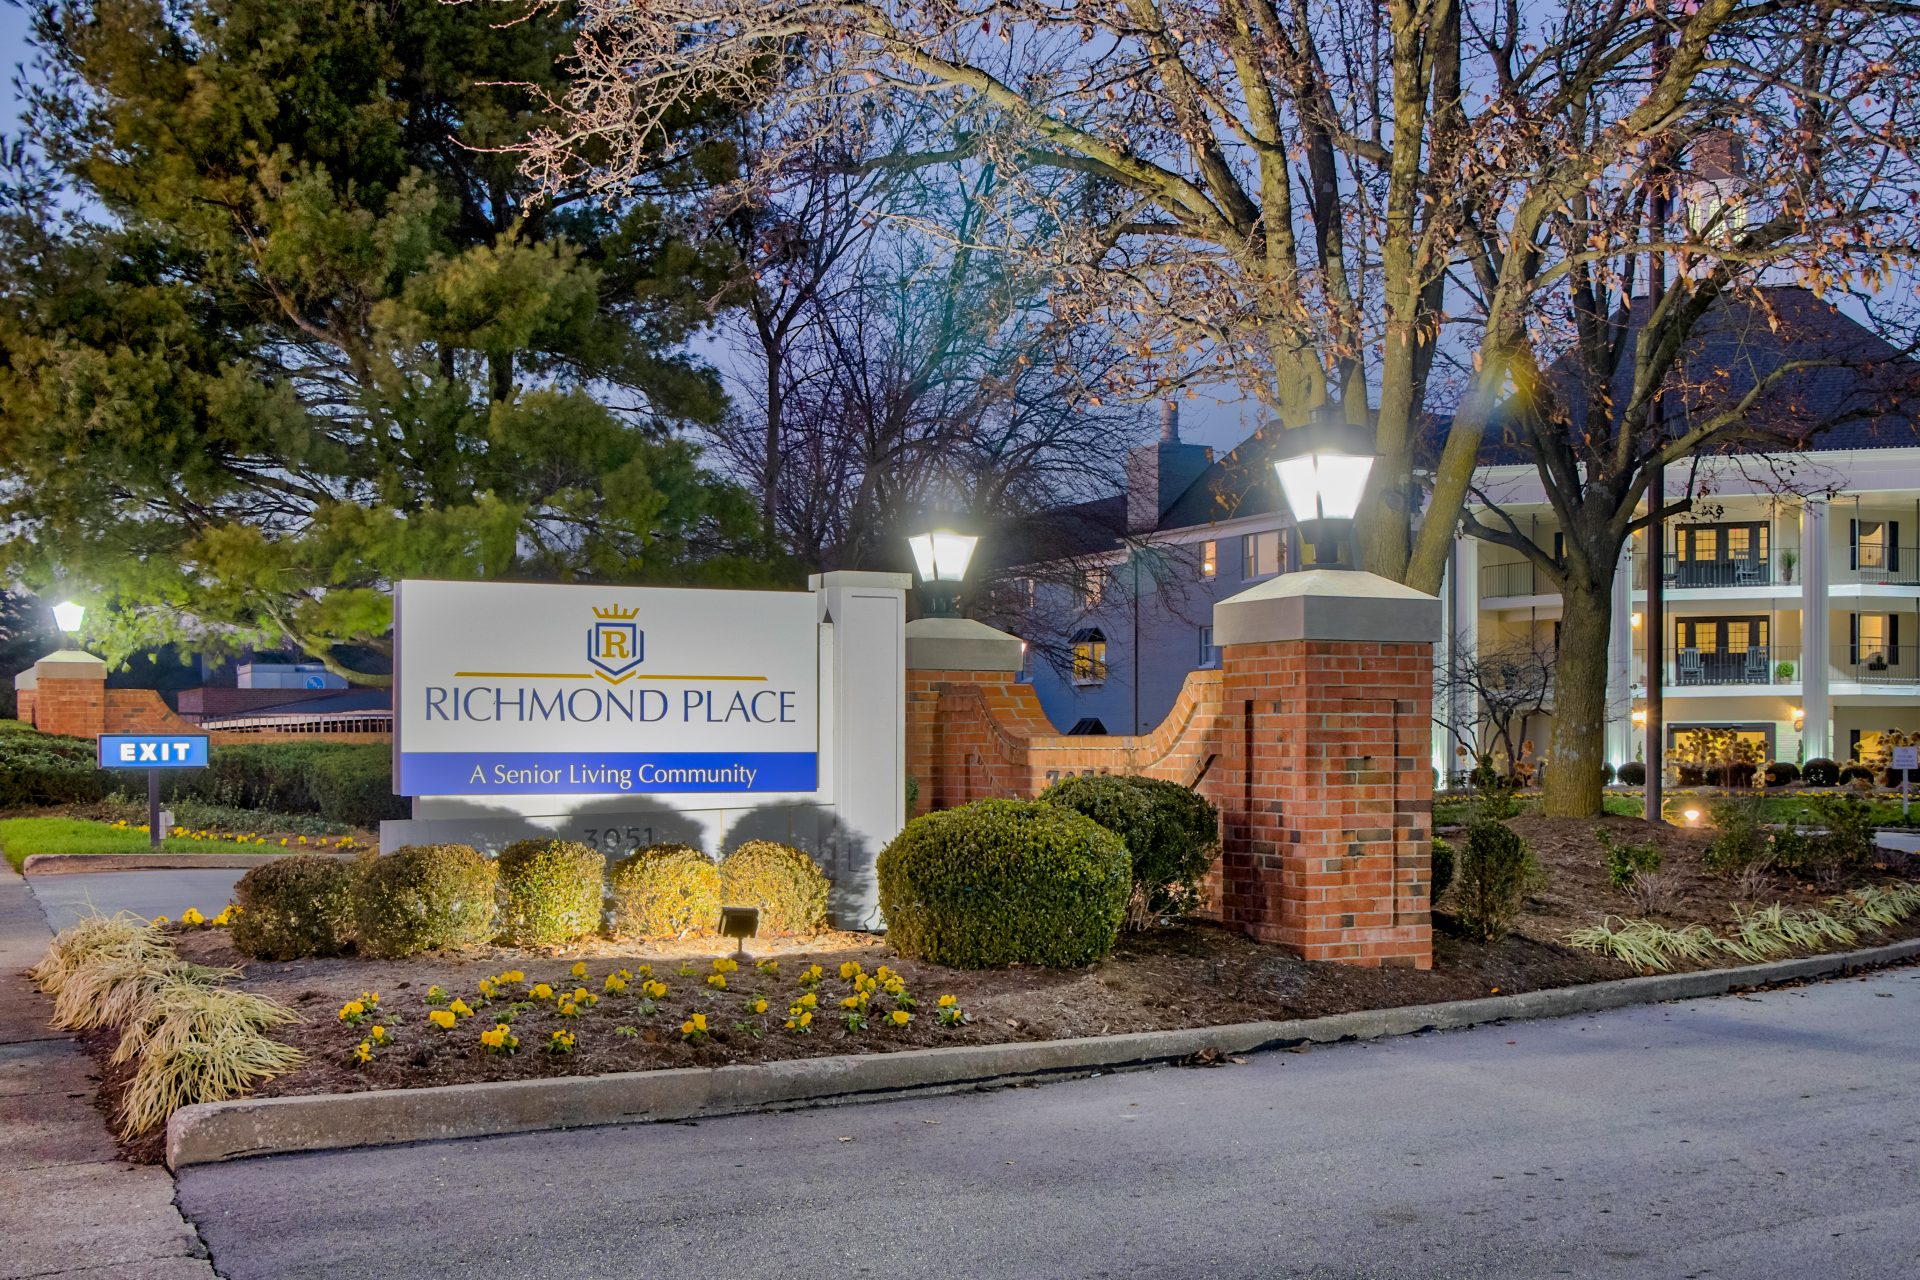 Entrance sign of Richmond Place, a senior living community, illuminated in the evening.